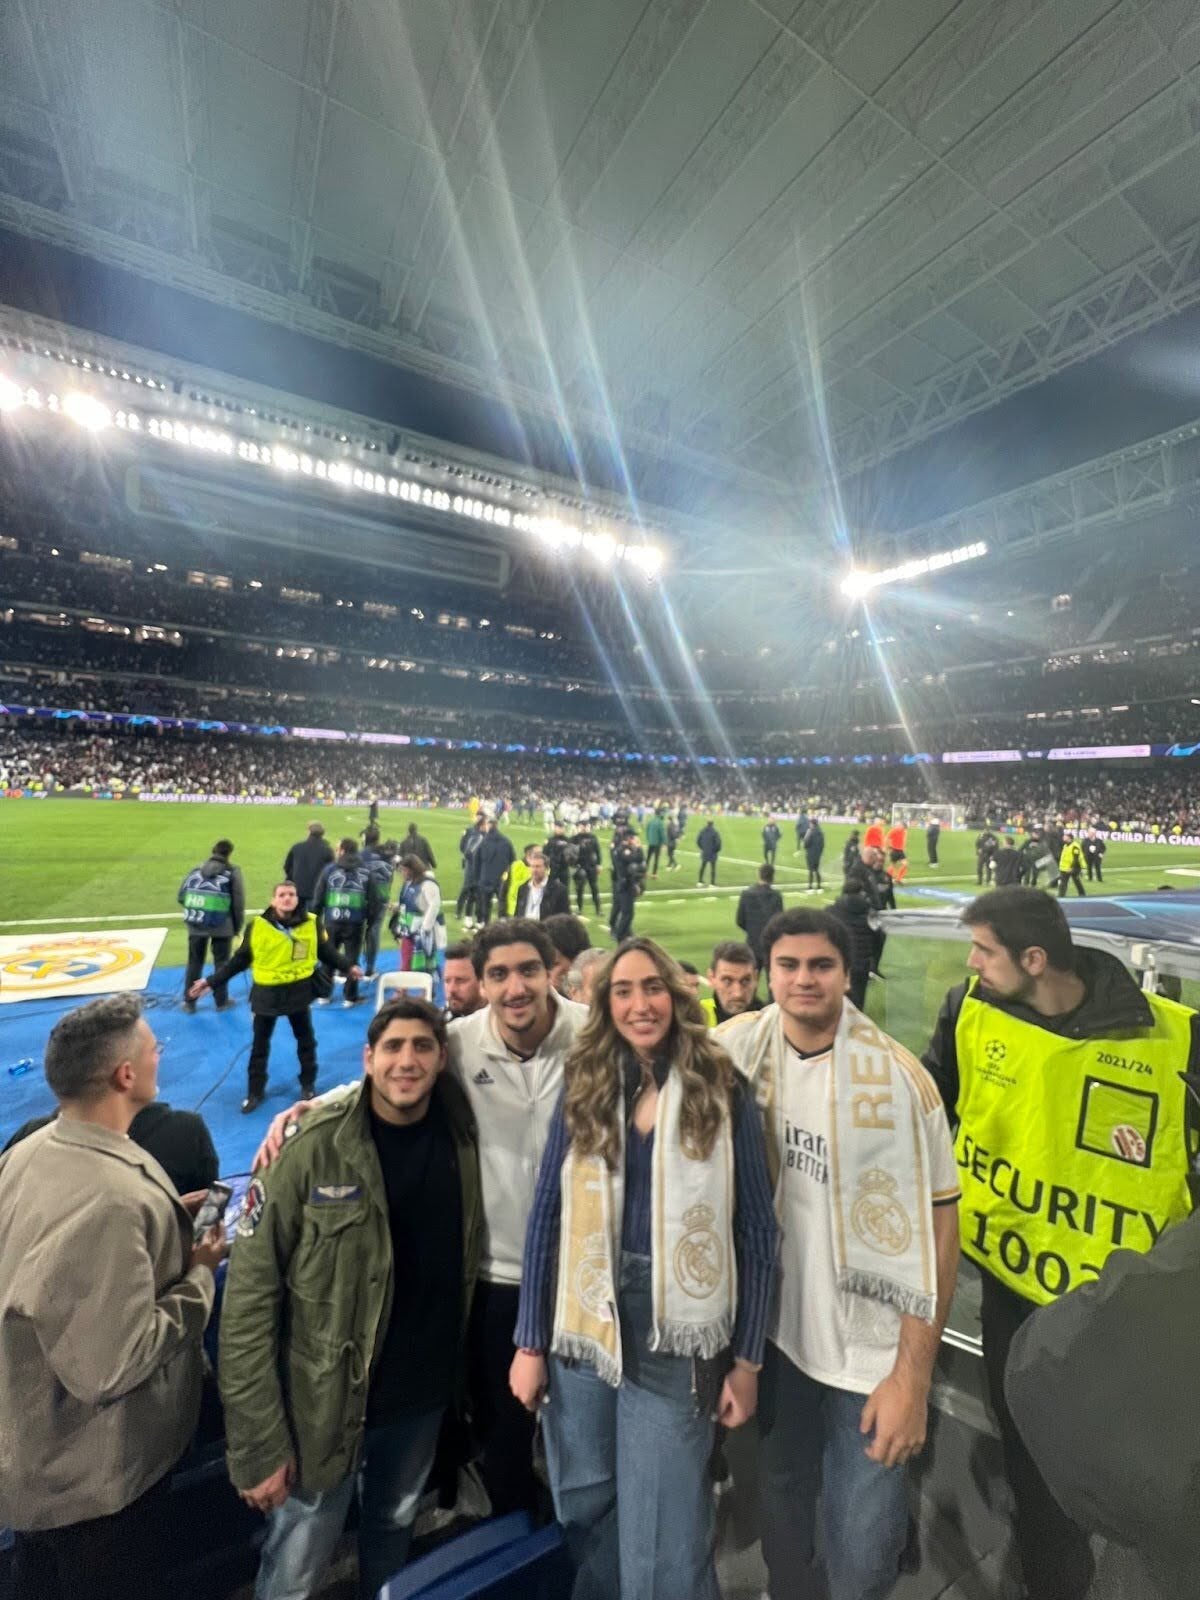 Students attending a Real Madrid game in Spain